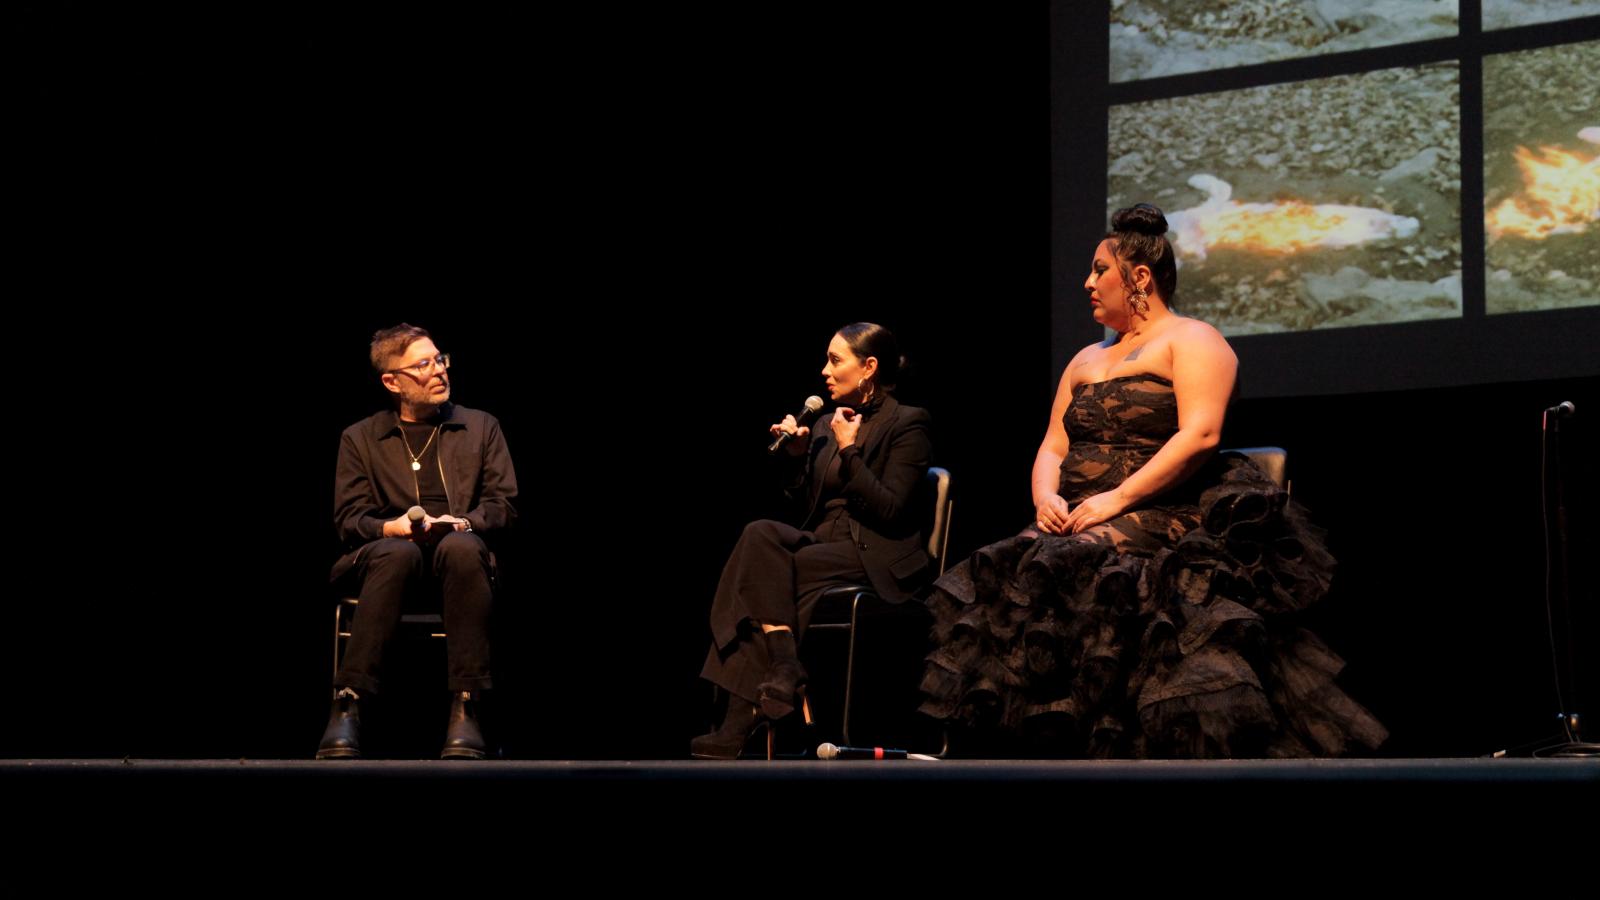 A man at left interviewing two woman dressed in black, one in a frilly dress on stage. 